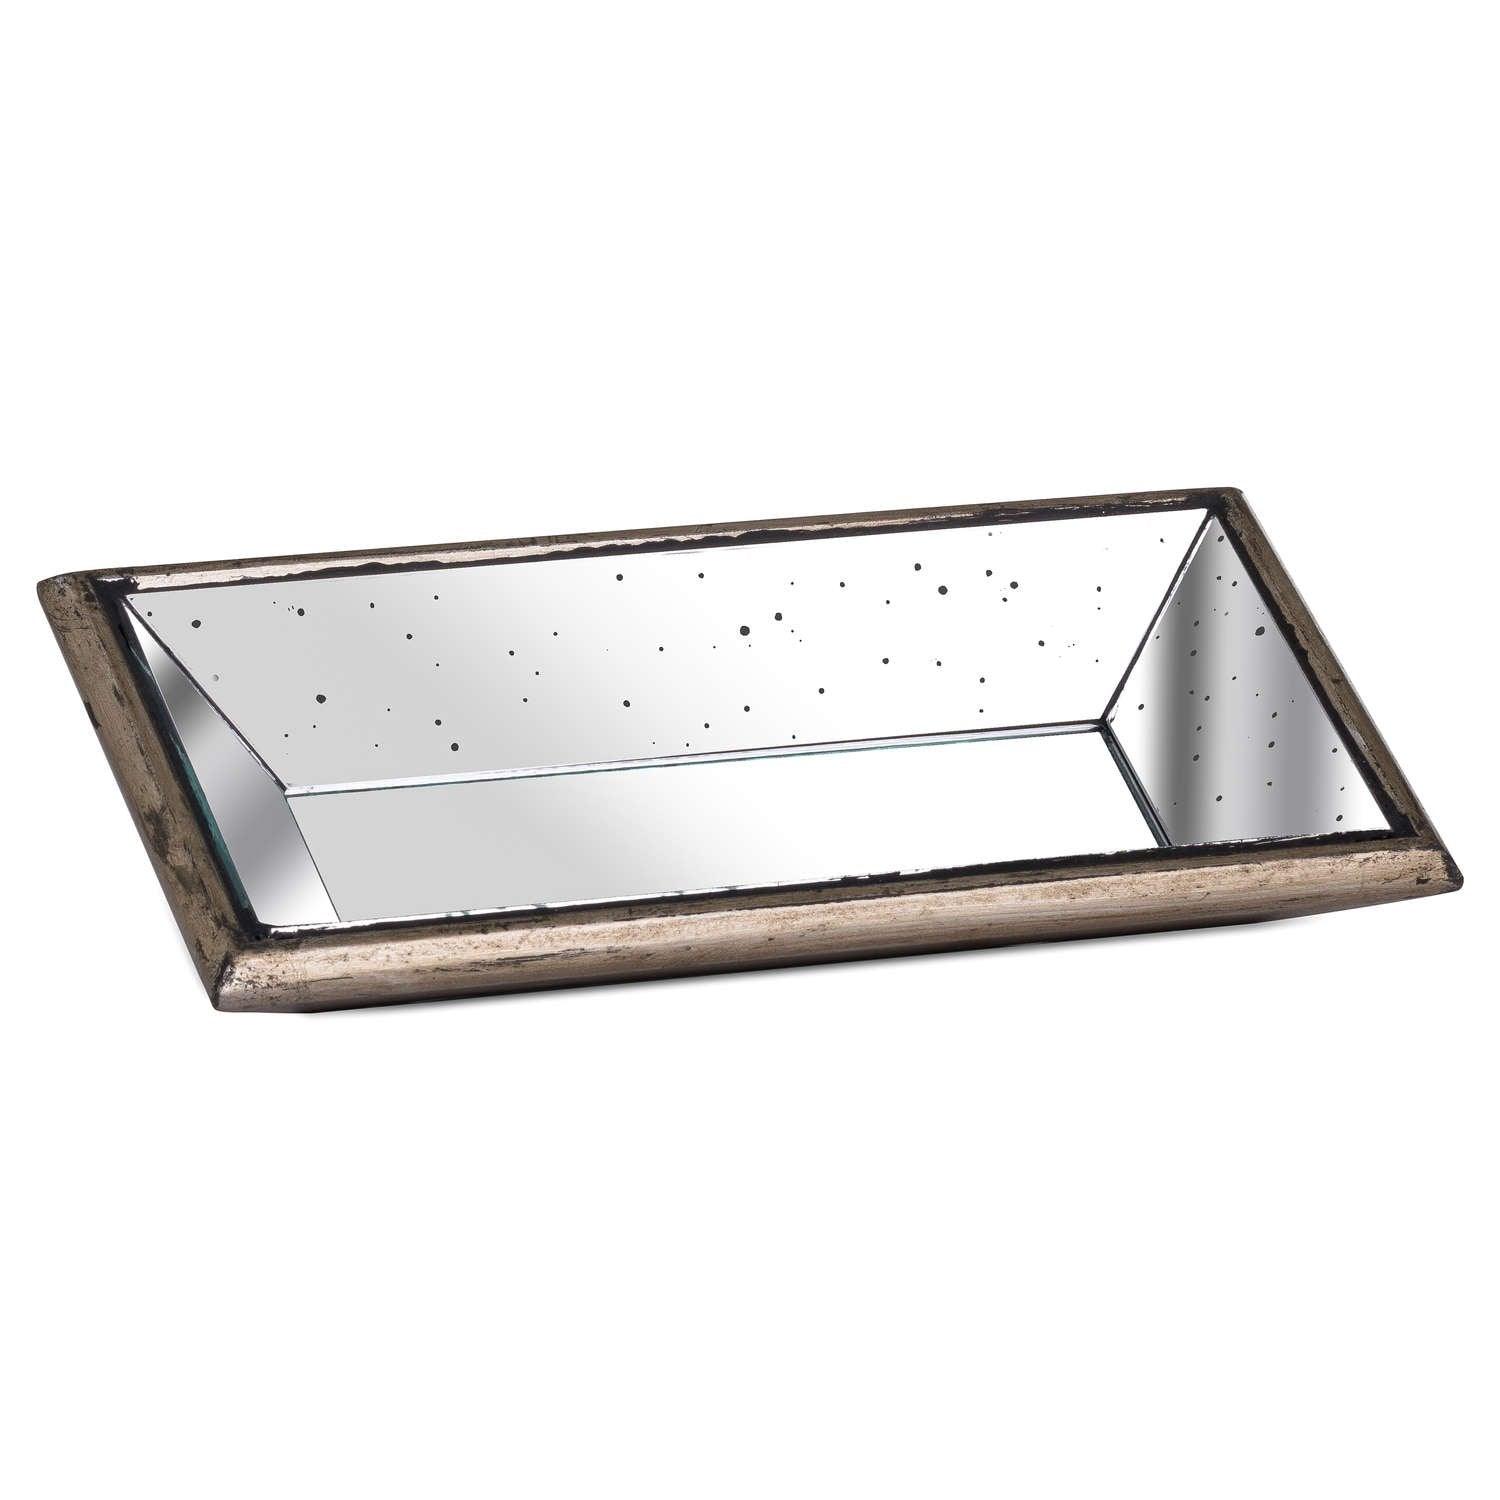 Astor Distressed Mirrored Display Tray With Wooden Detailing - Vookoo Lifestyle